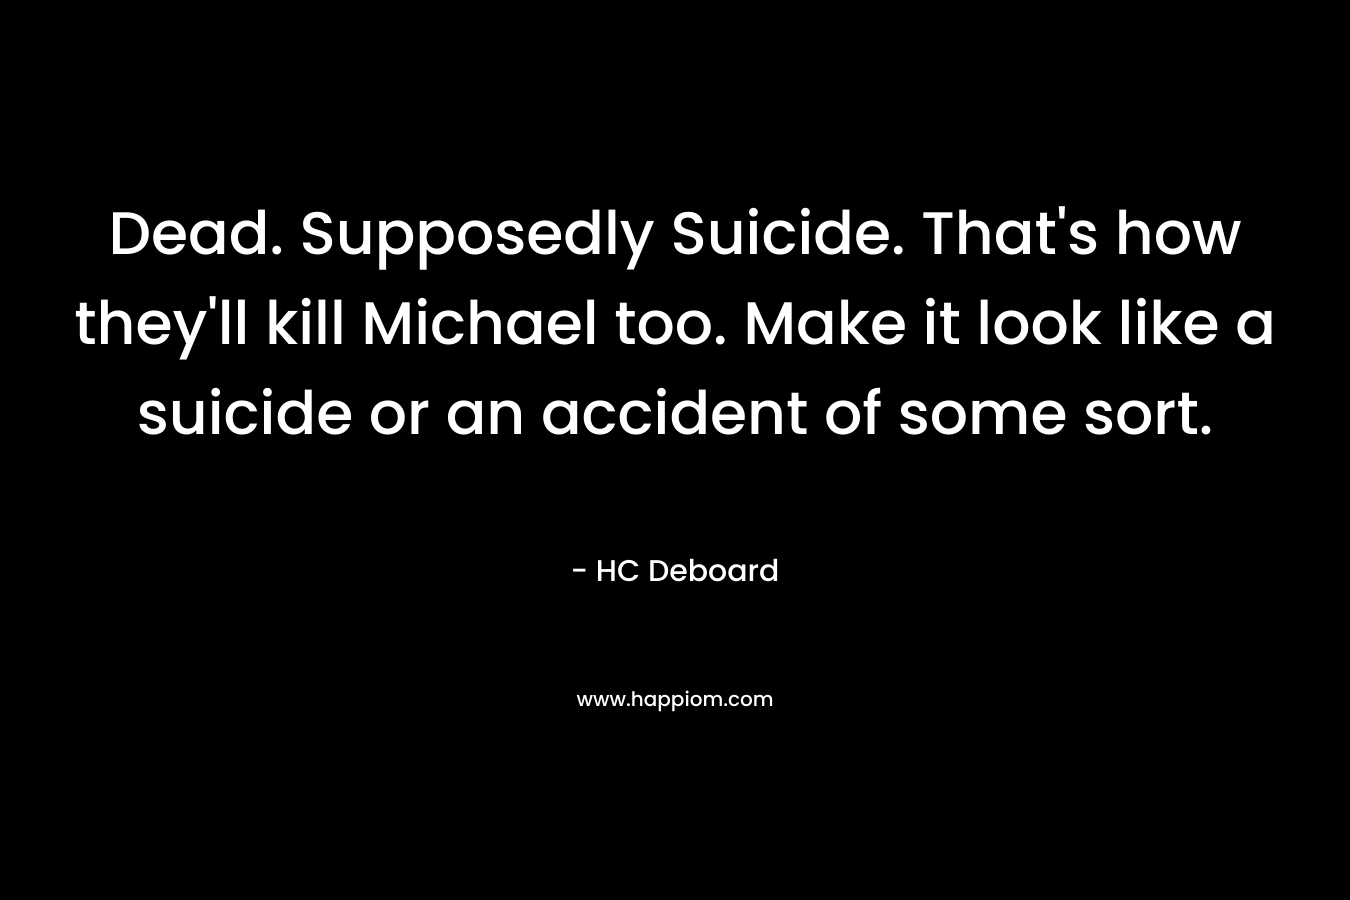 Dead. Supposedly Suicide. That's how they'll kill Michael too. Make it look like a suicide or an accident of some sort.